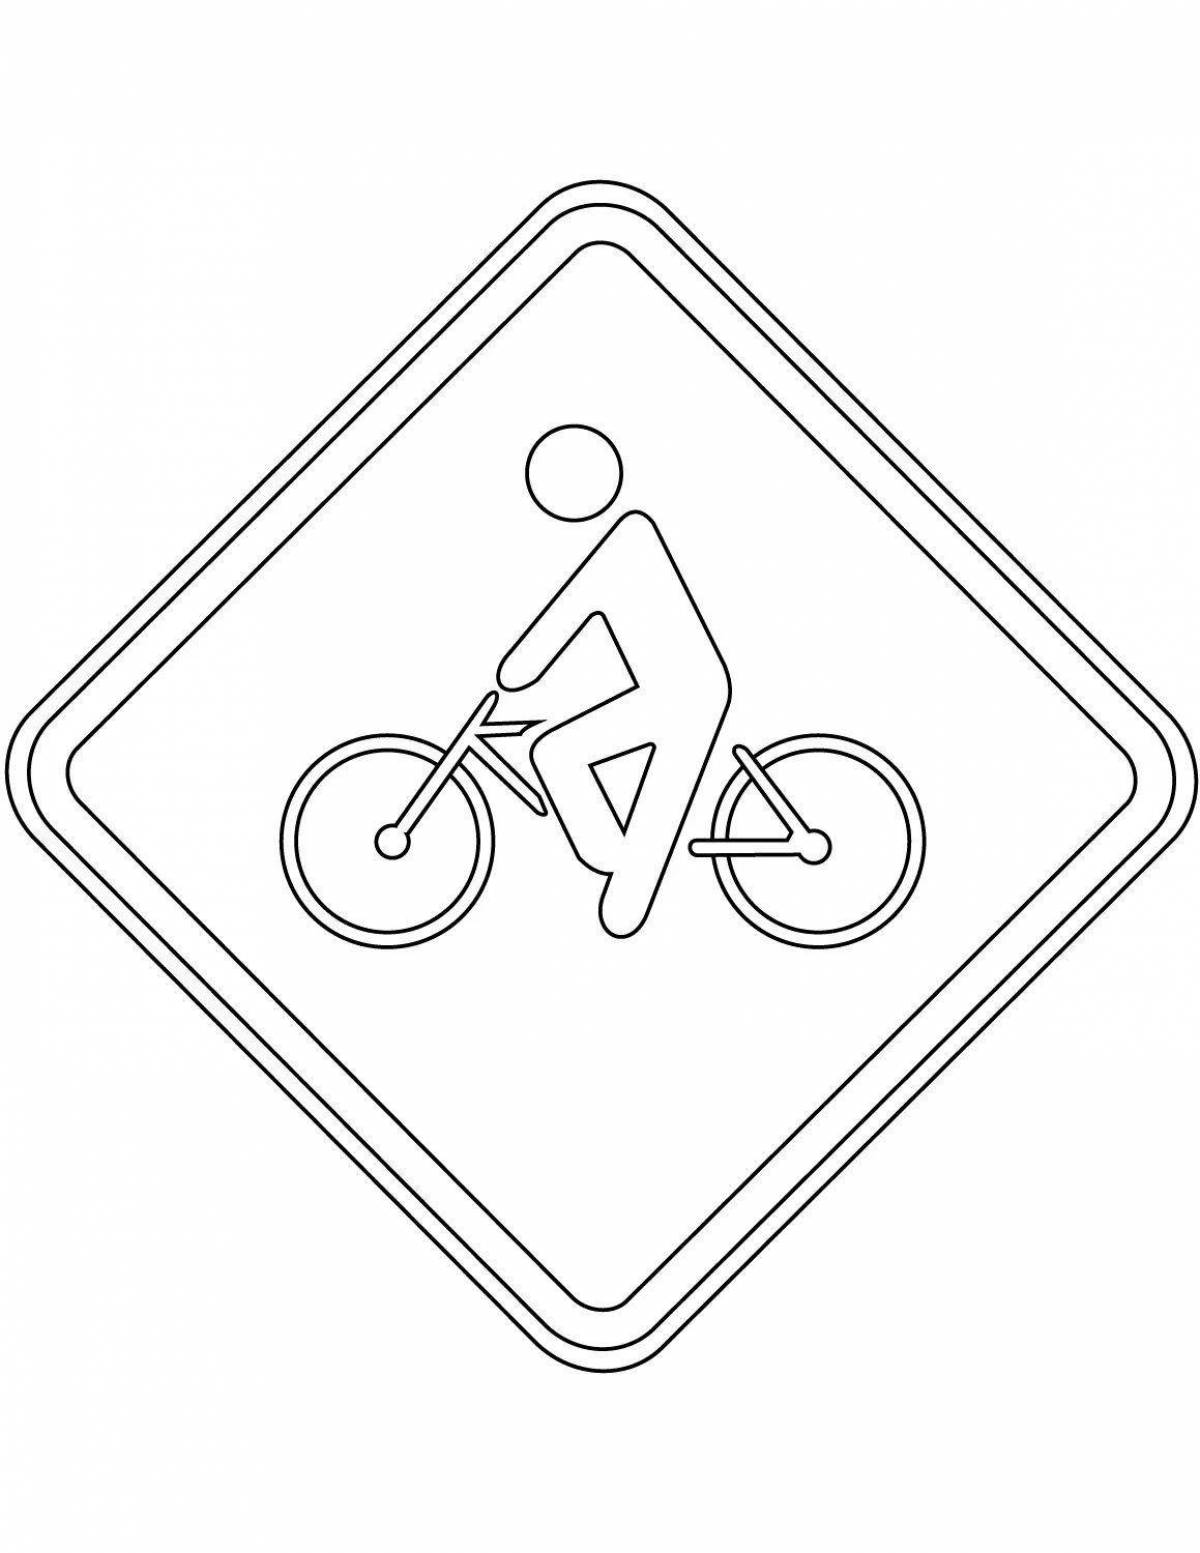 Tempting No Bicycle Coloring Page